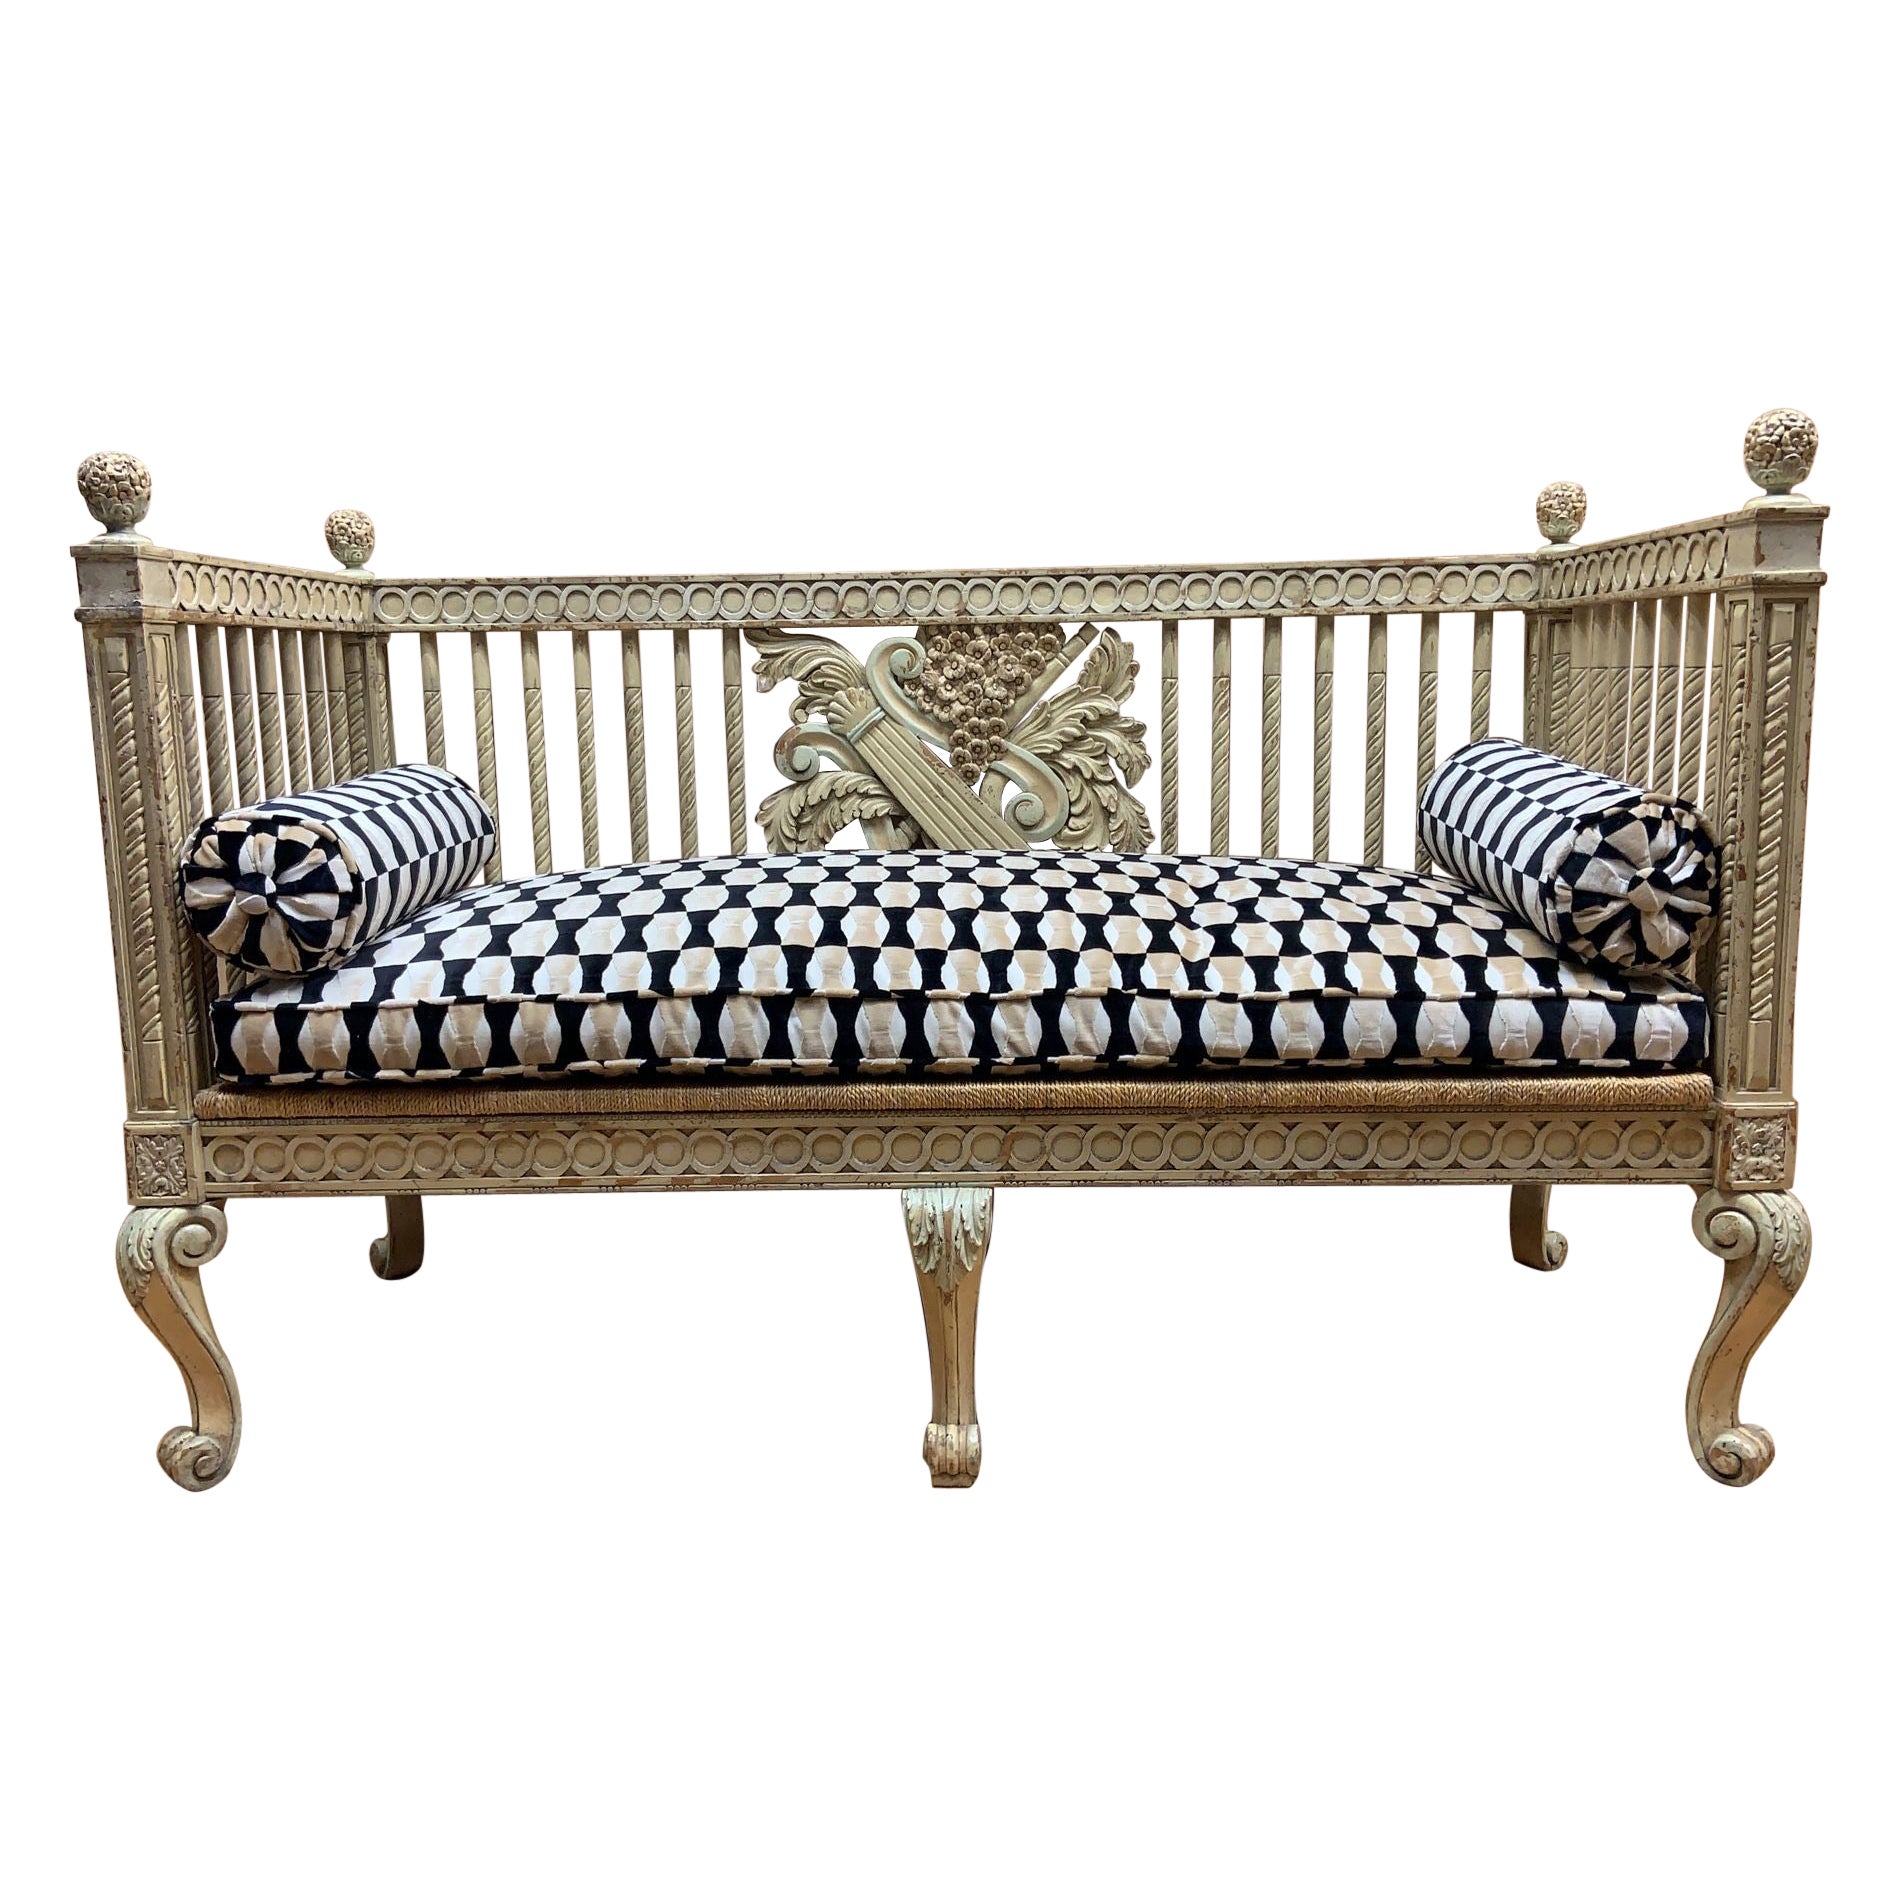 Vintage Italian Neoclassical Carved Sette Bench